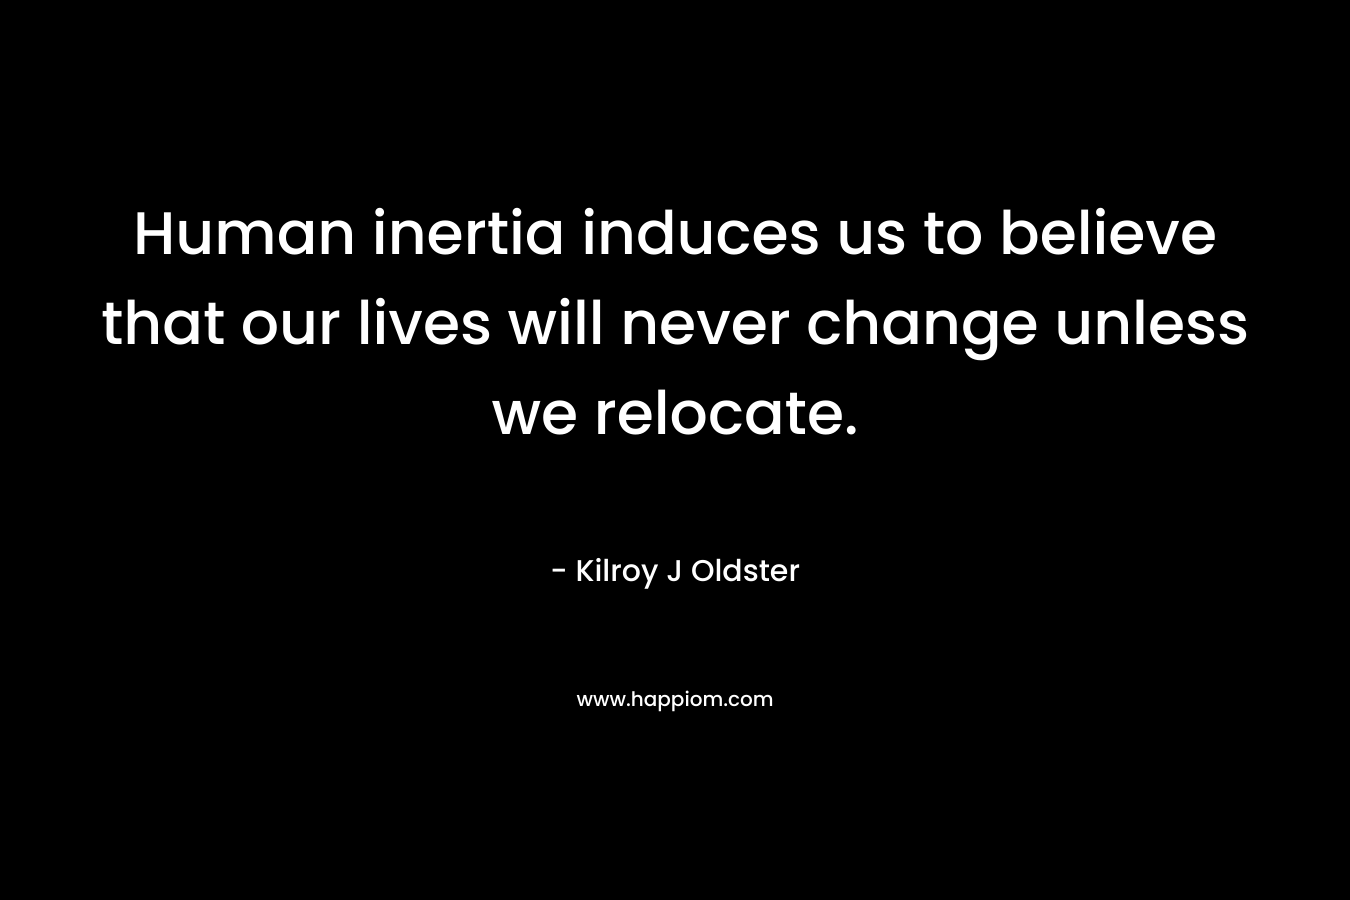 Human inertia induces us to believe that our lives will never change unless we relocate. – Kilroy J Oldster